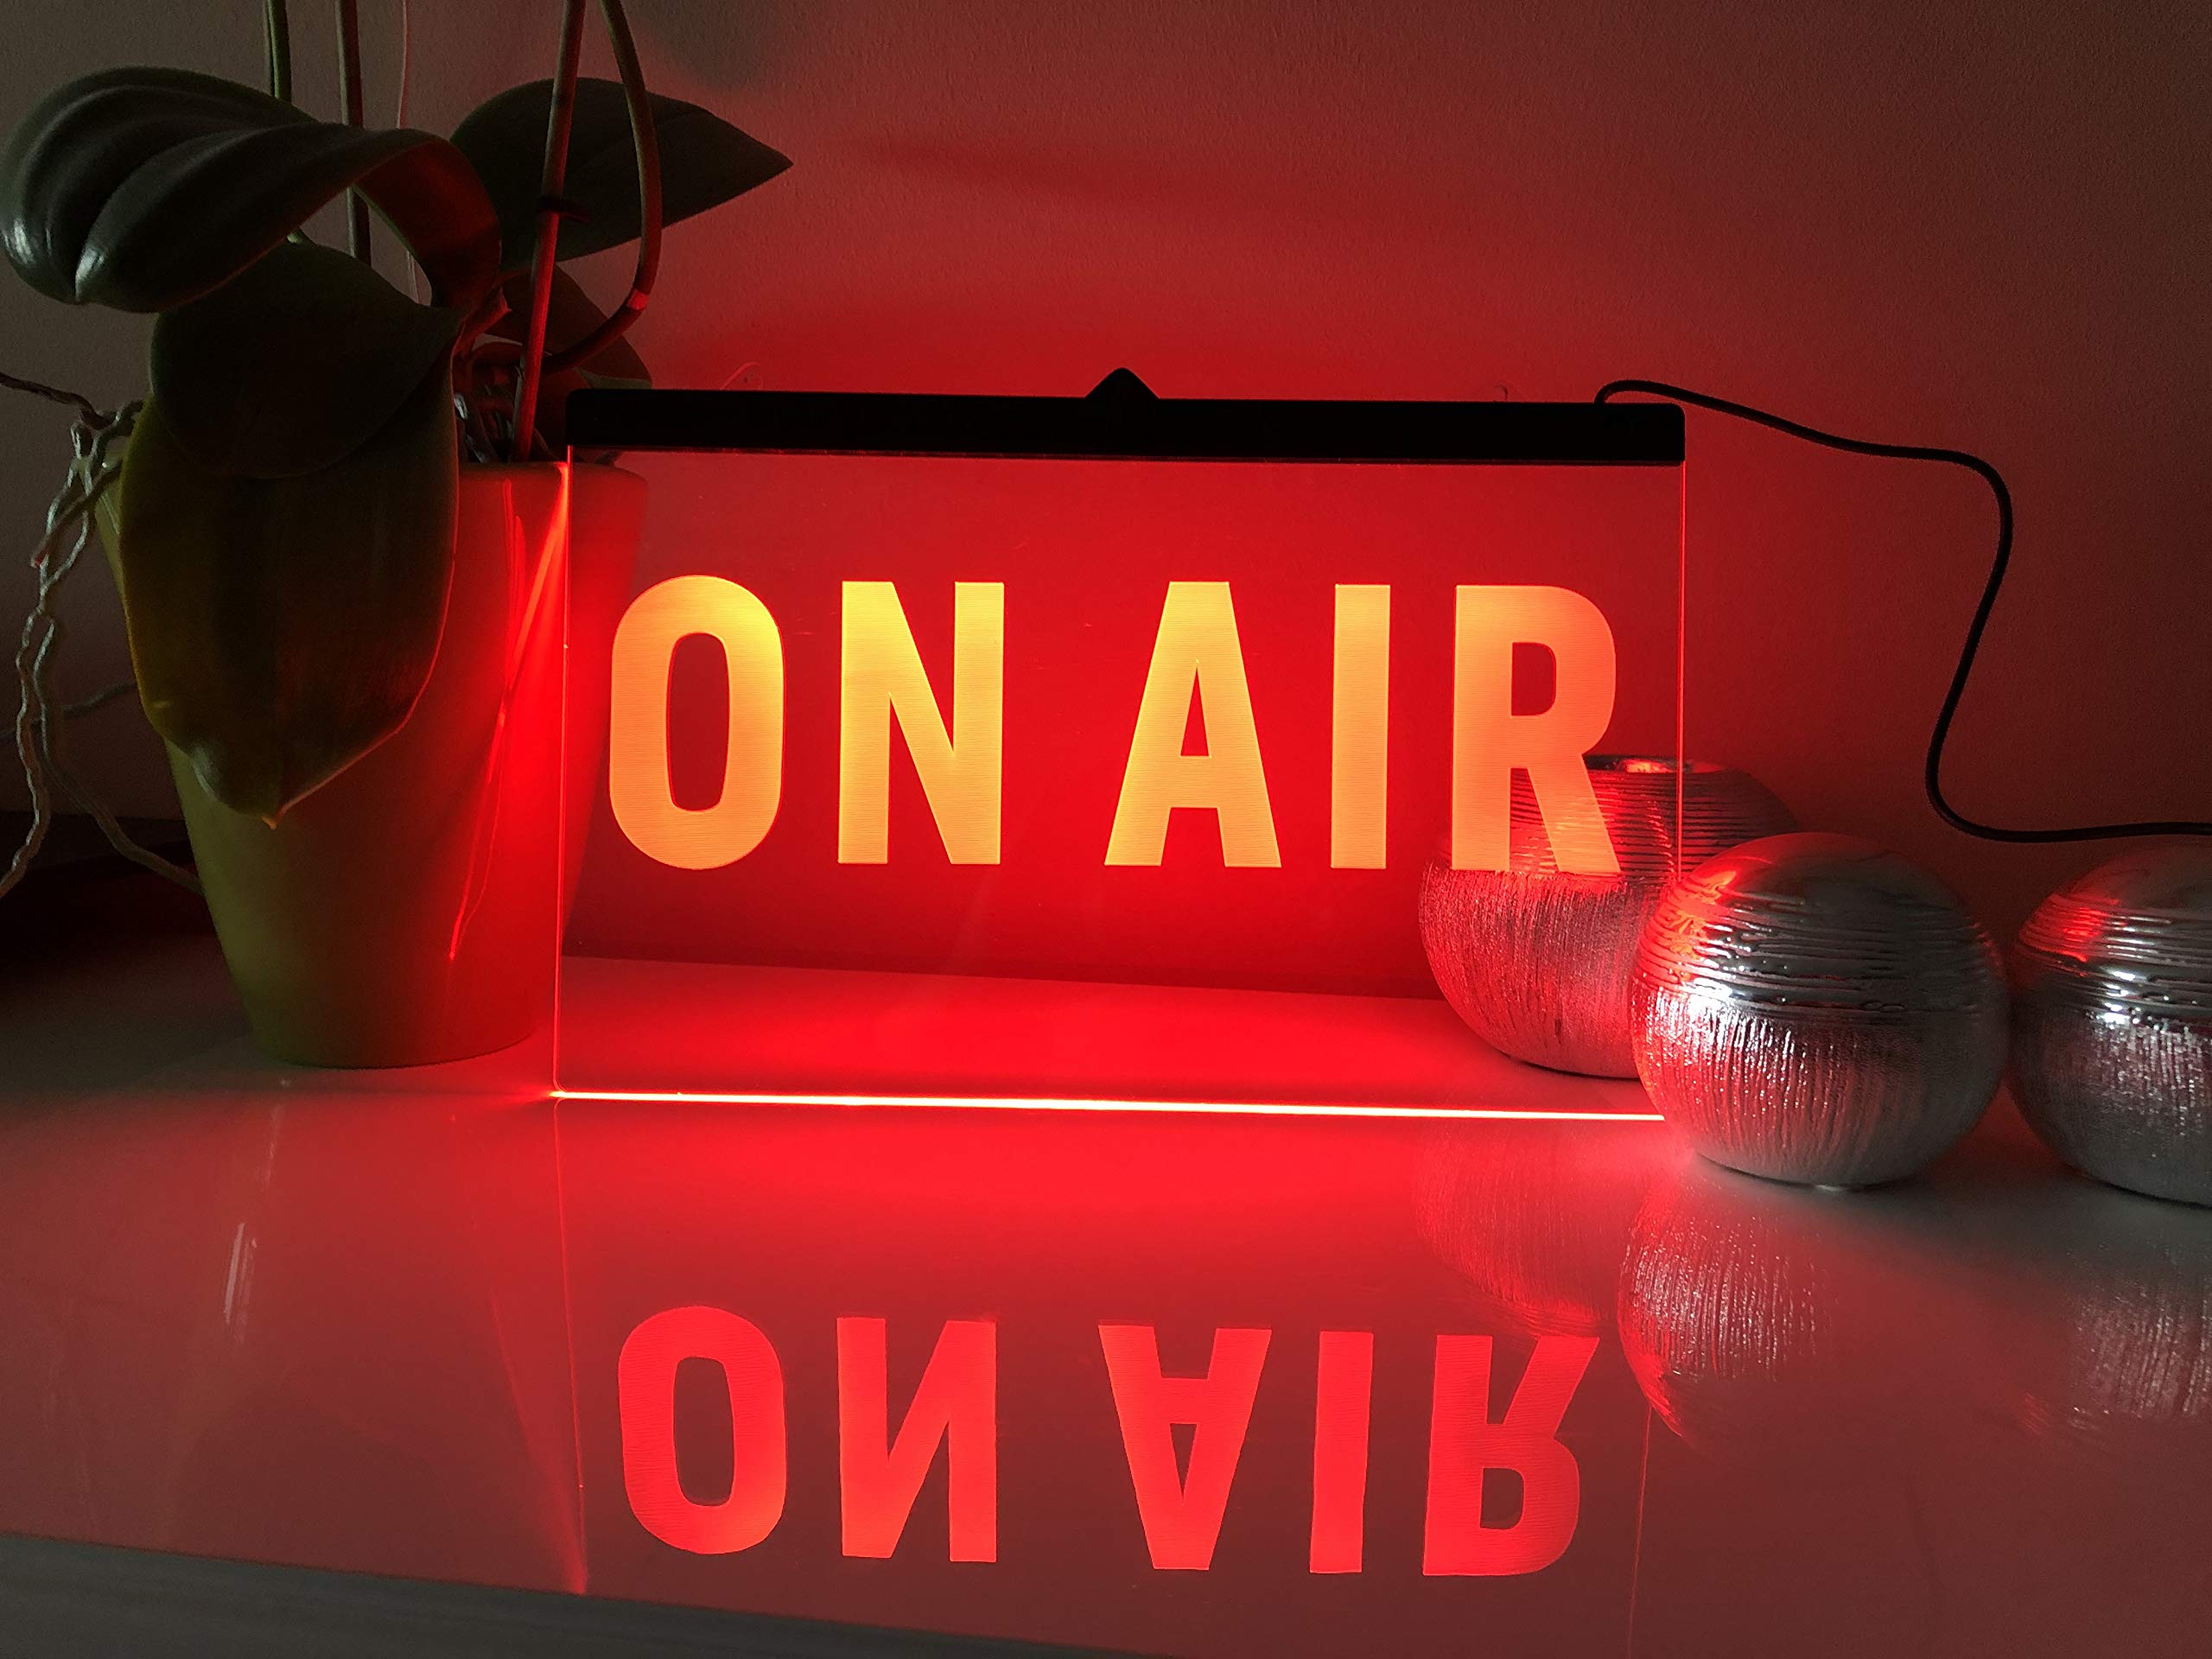 On Air – Contact Details